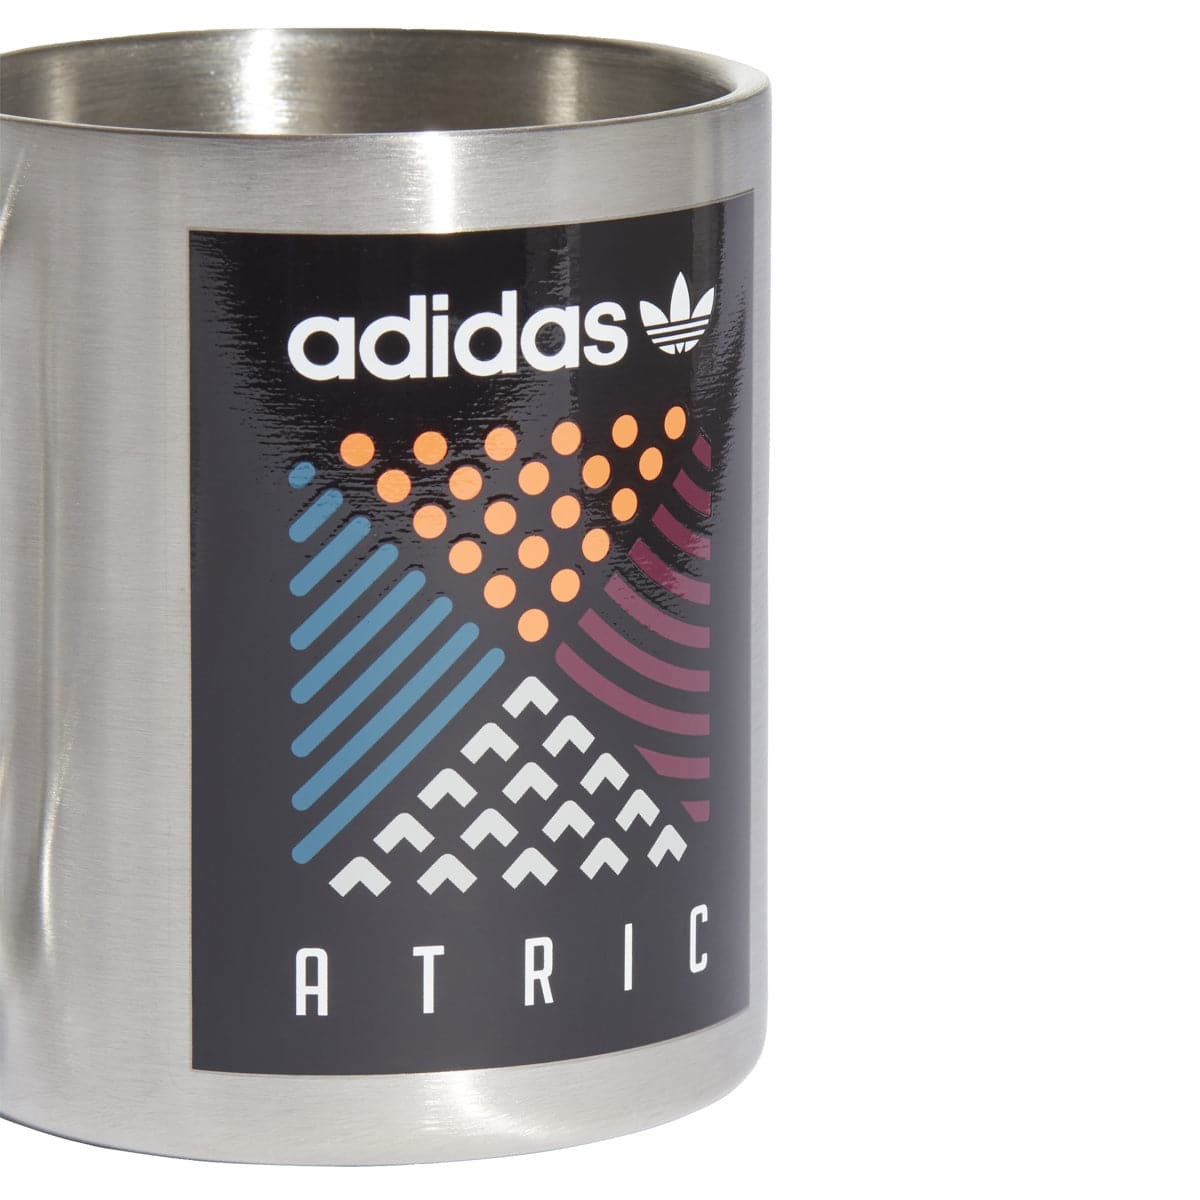 adidas Thermos Cup 'Atric' (Silber)  - Allike Store